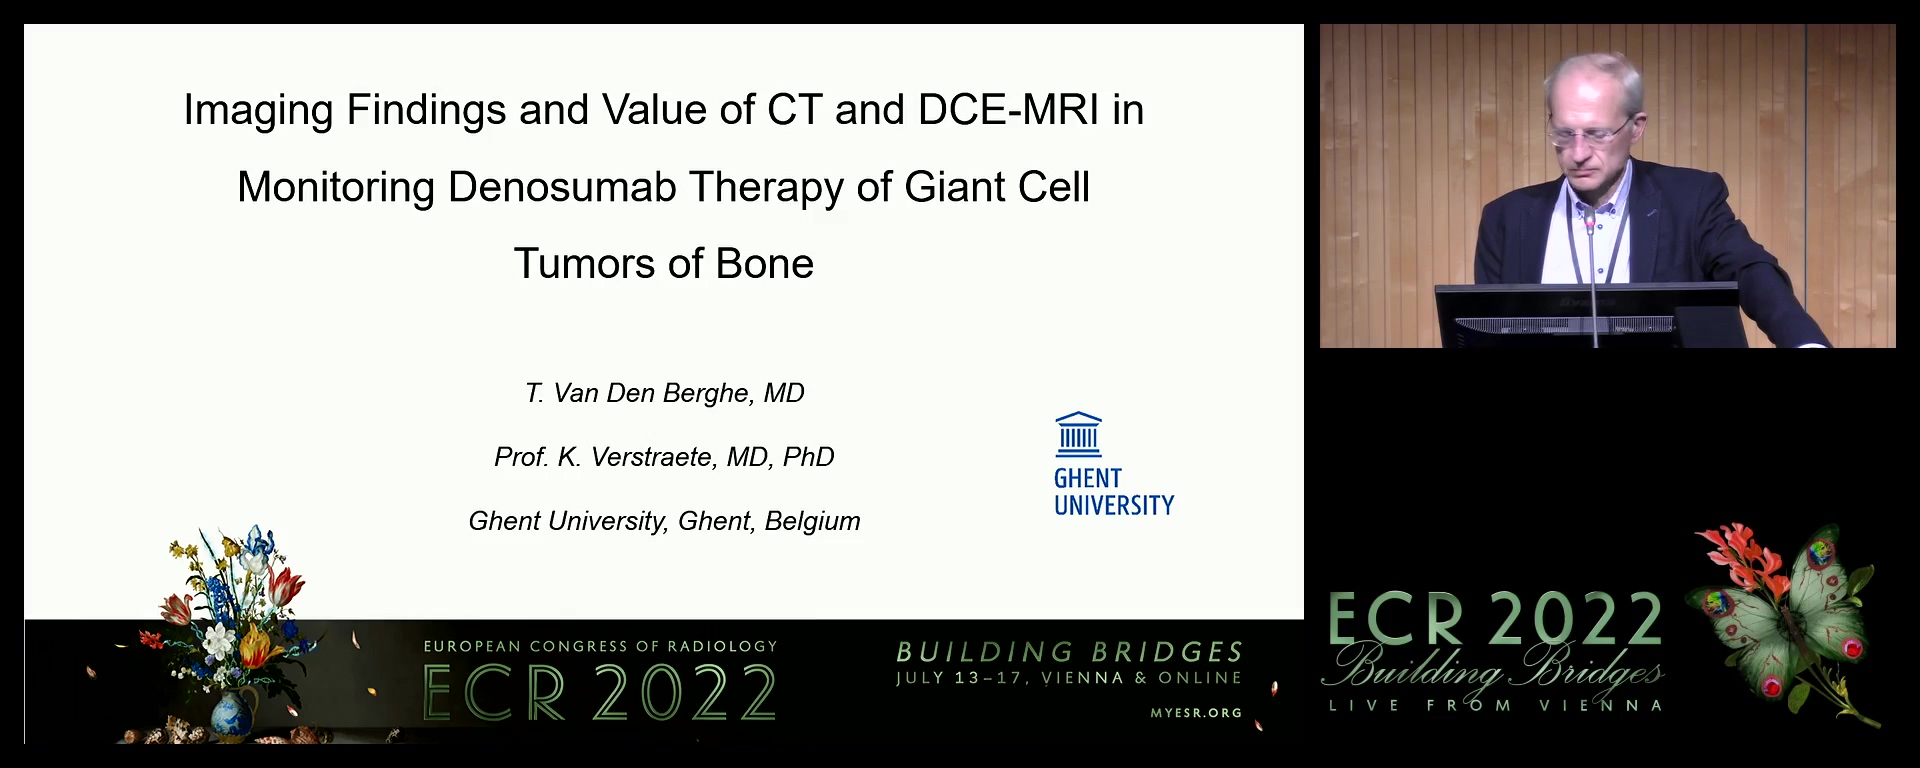 Imaging findings and value of CT and (DCE-)MRI in monitoring denosumab therapy of giant cell tumours of bone